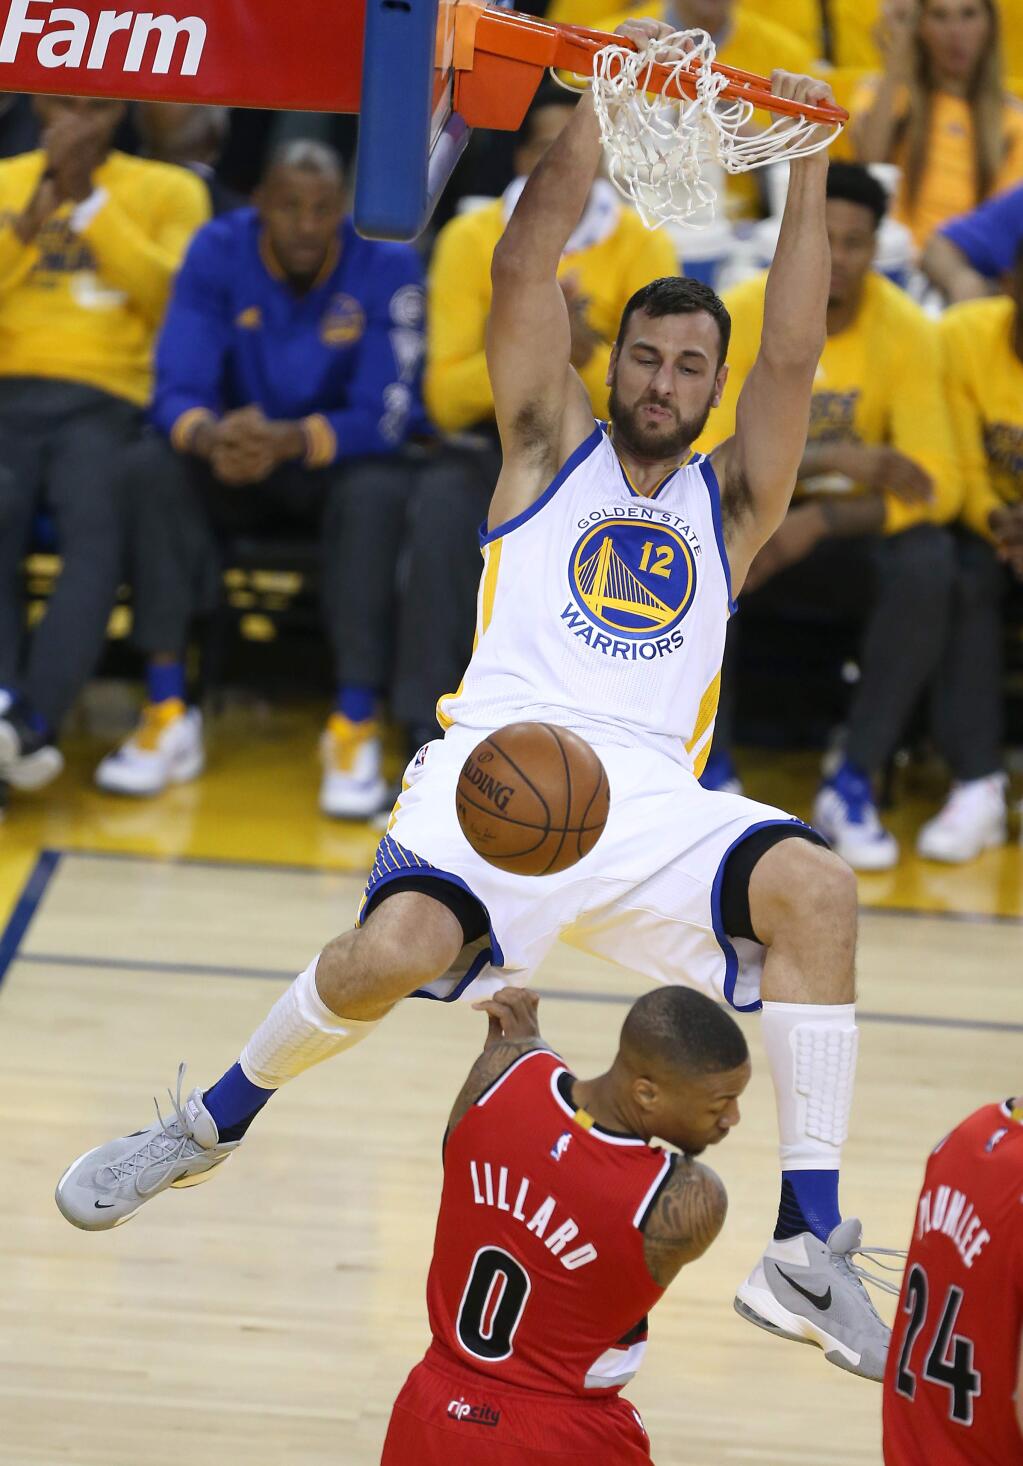 Golden State Warriors' Andrew Bogut dunks on Portland Trail Blazers' Damian Lillard, during their game in Oakland on Wednesday, May 11, 2016. (Christopher Chung/ The Press Democrat)